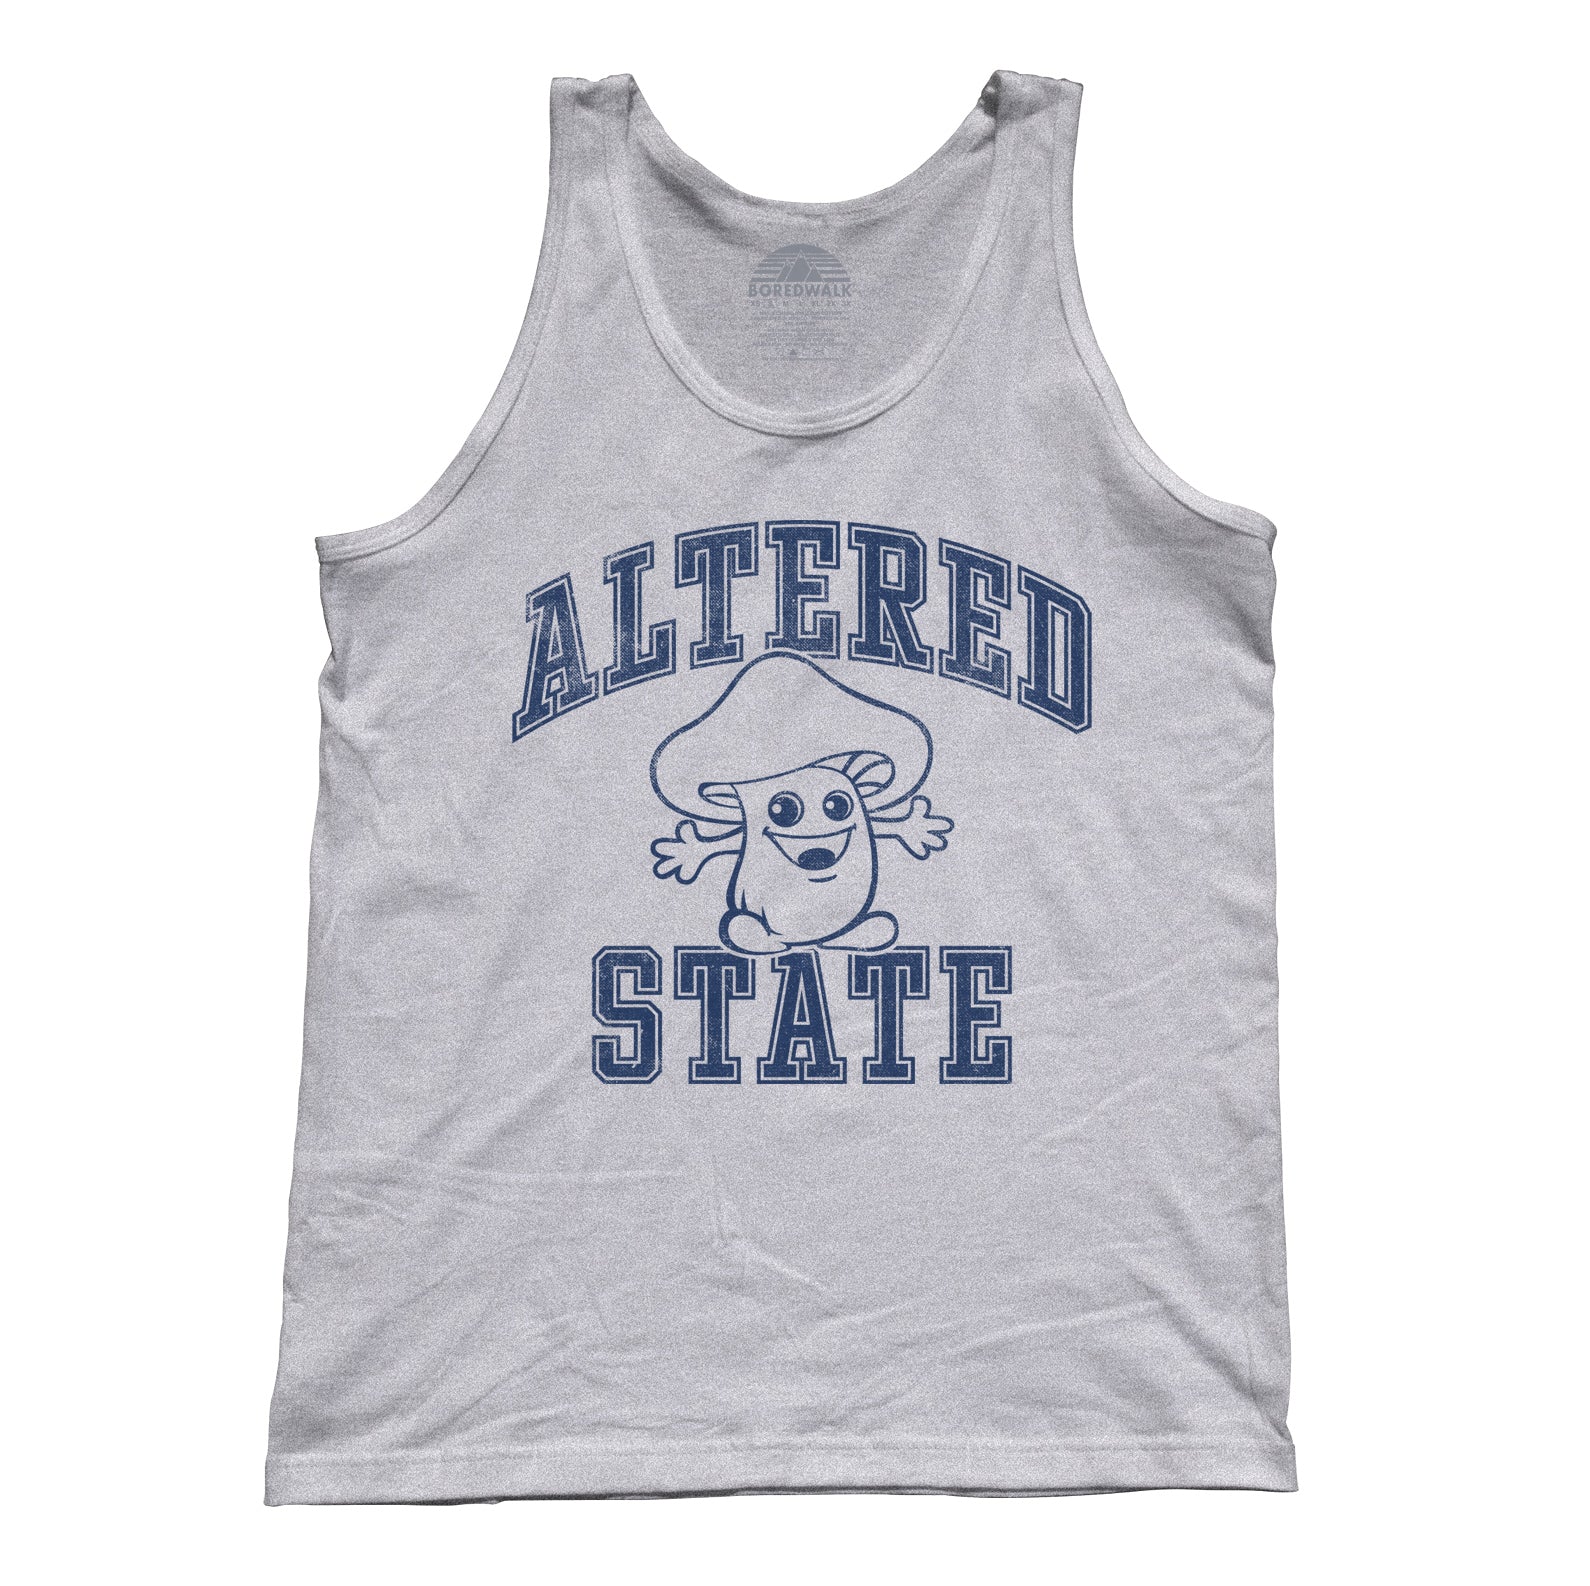 Unisex Altered State Tank Top